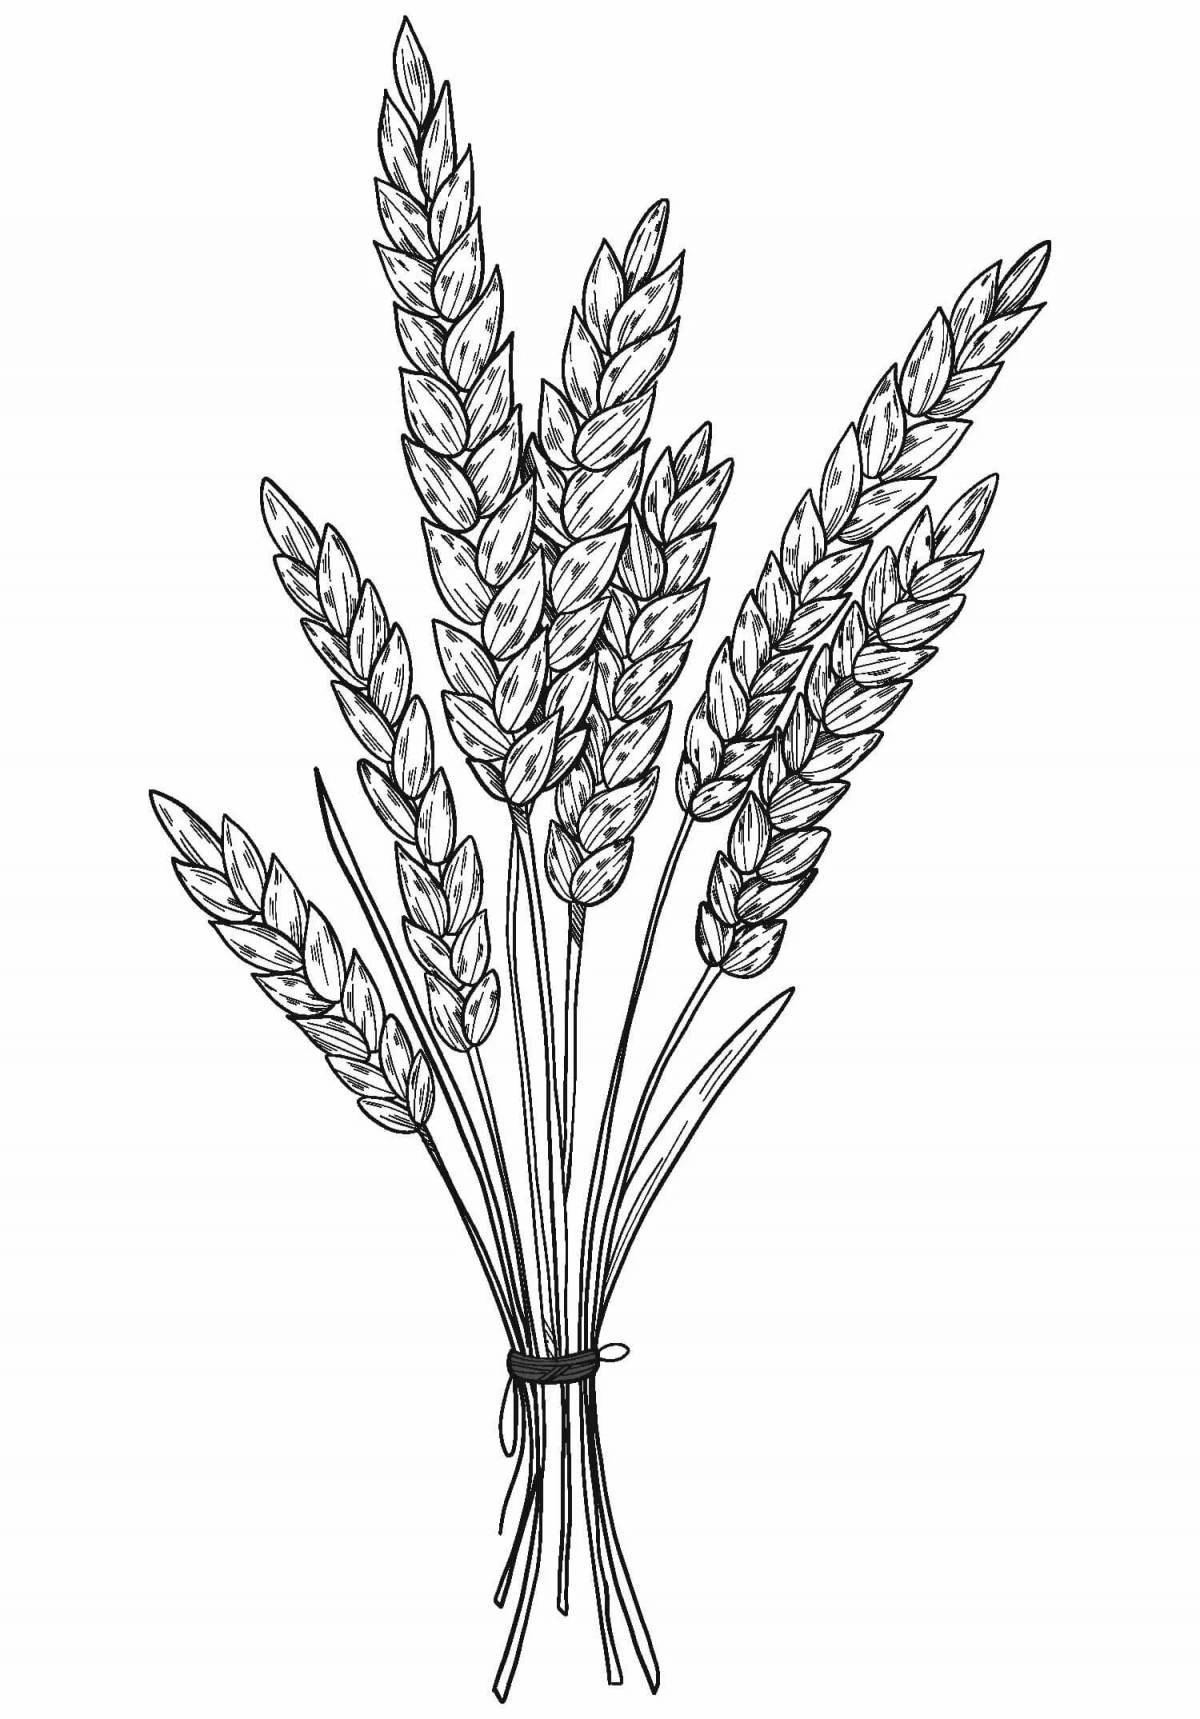 Shining spikelet of wheat coloring book for kids